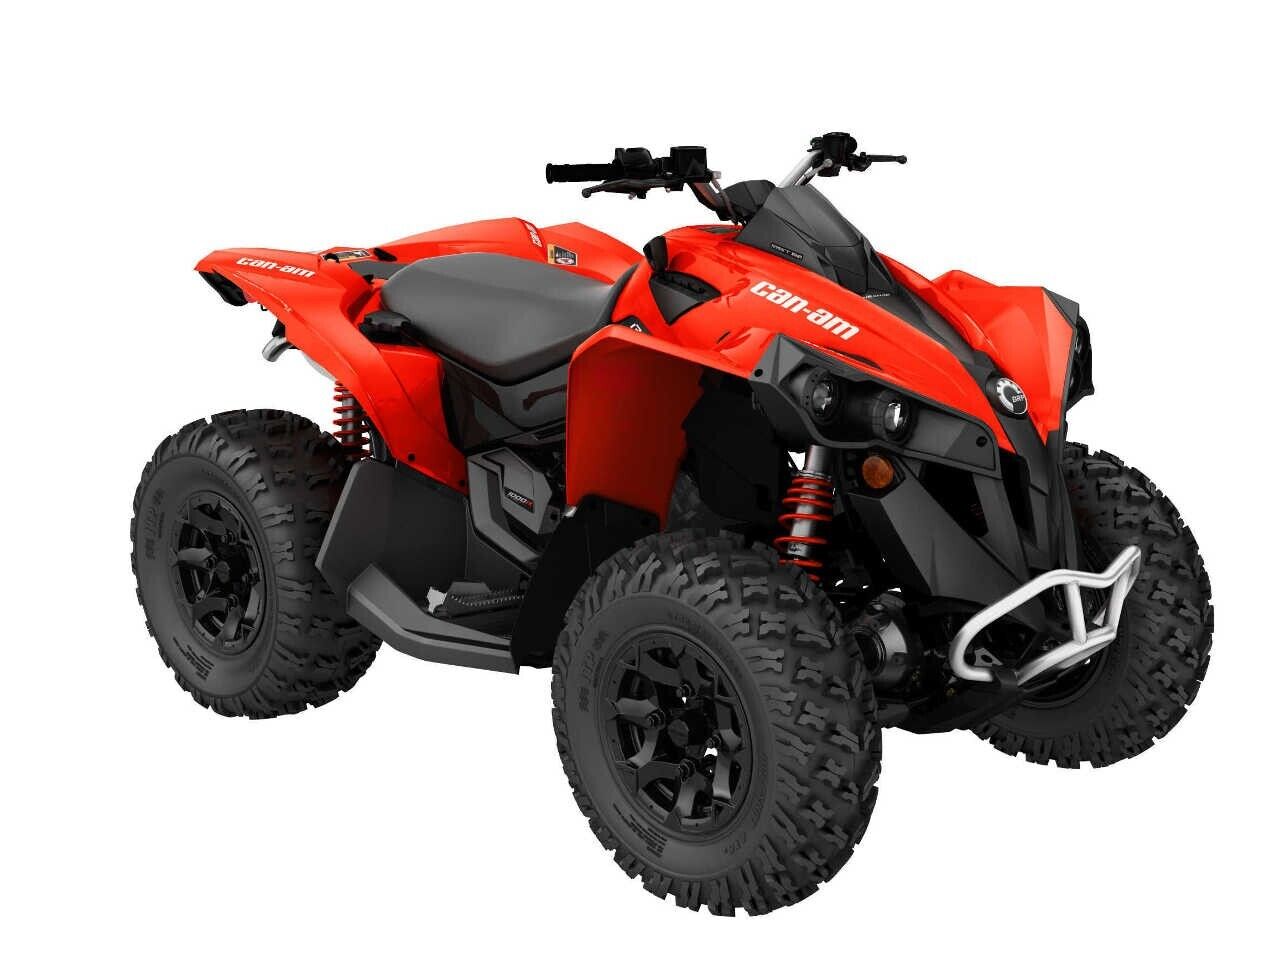 CAN AM RENEGADE 1000R XXC 2012-2017